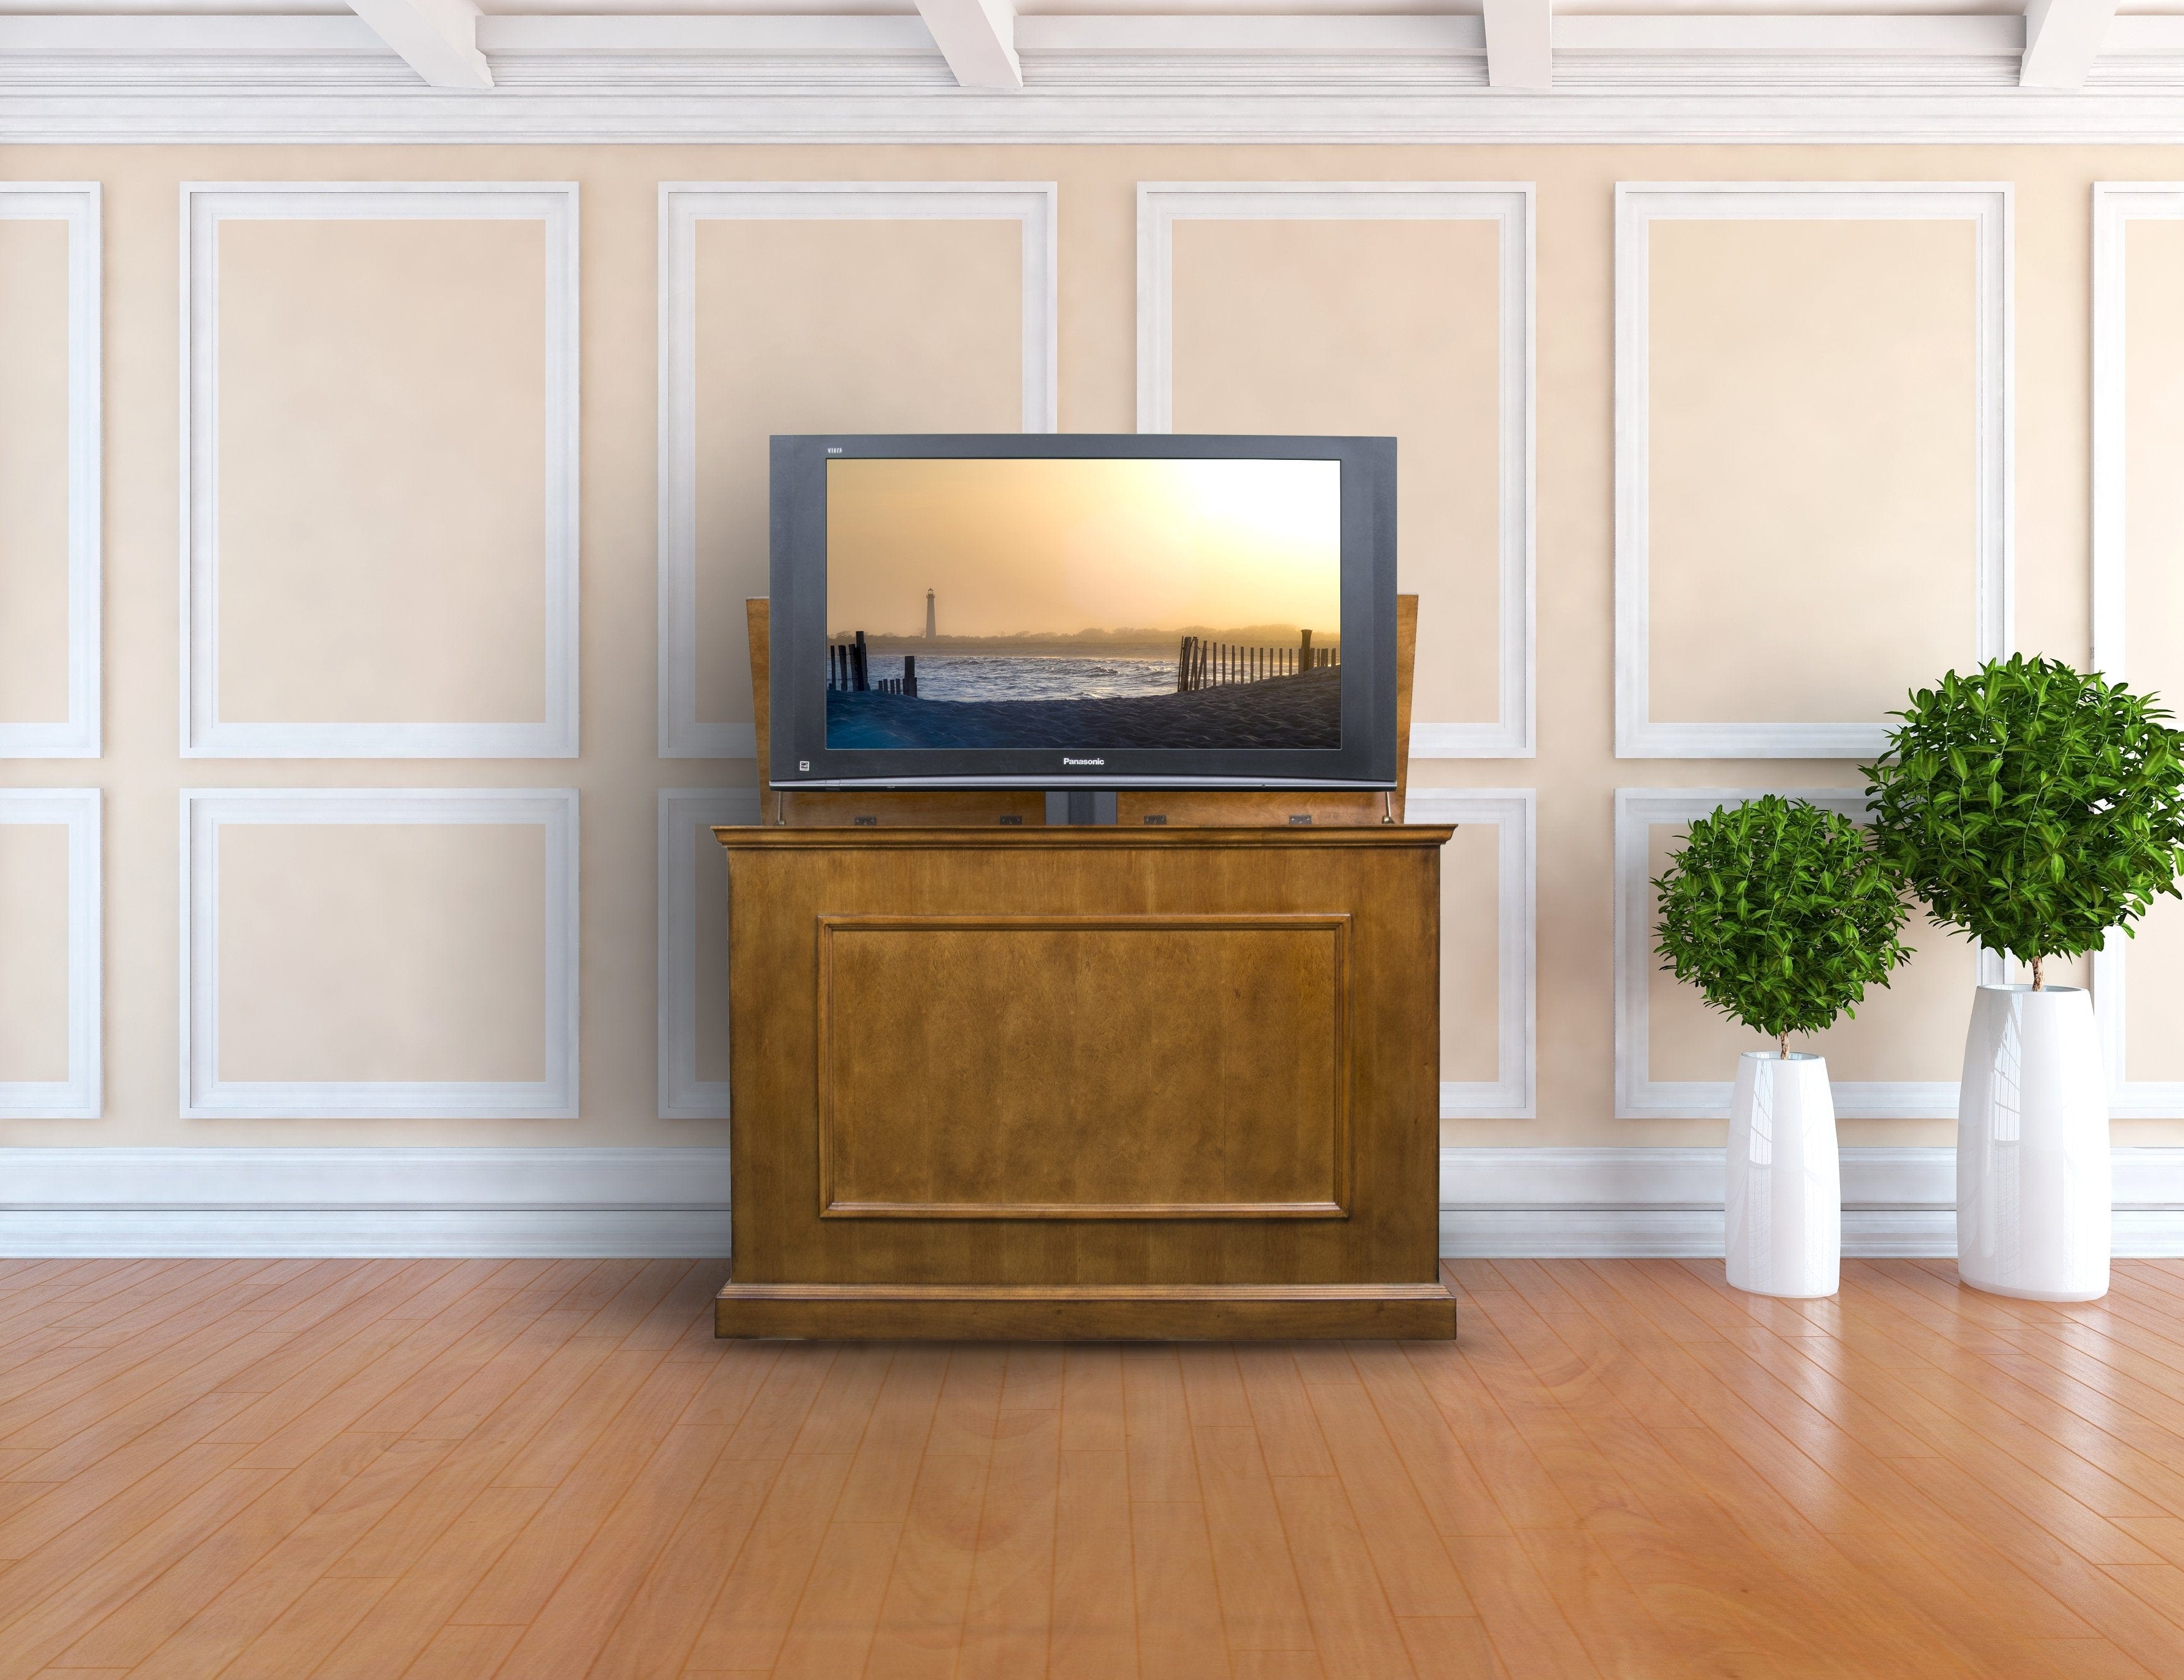 Elevate 72009 Honey Oak TV Lift Cabinet  Touchstone Home Products, Inc.